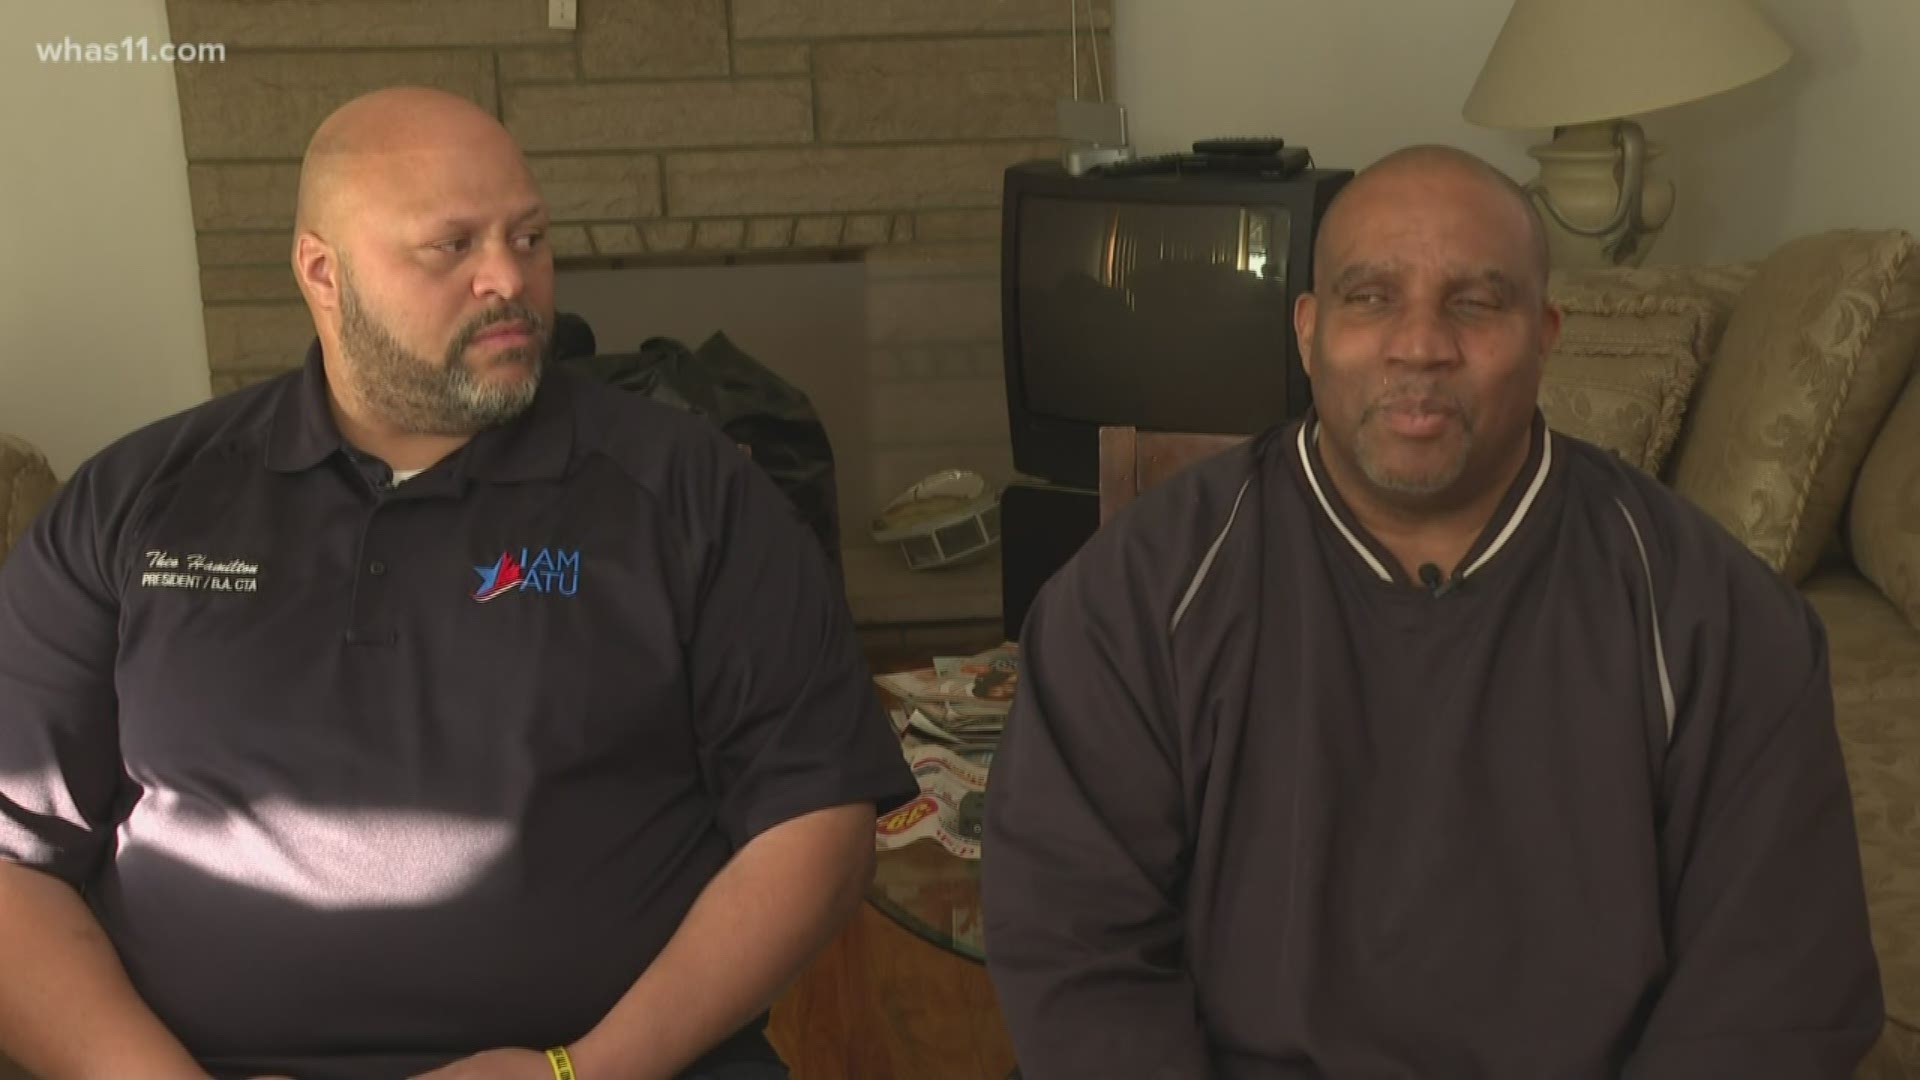 Avid TARC users with disabilities still facing life threatening problems. As they continue to get left on the streets, wondering where their para-transit drivers are